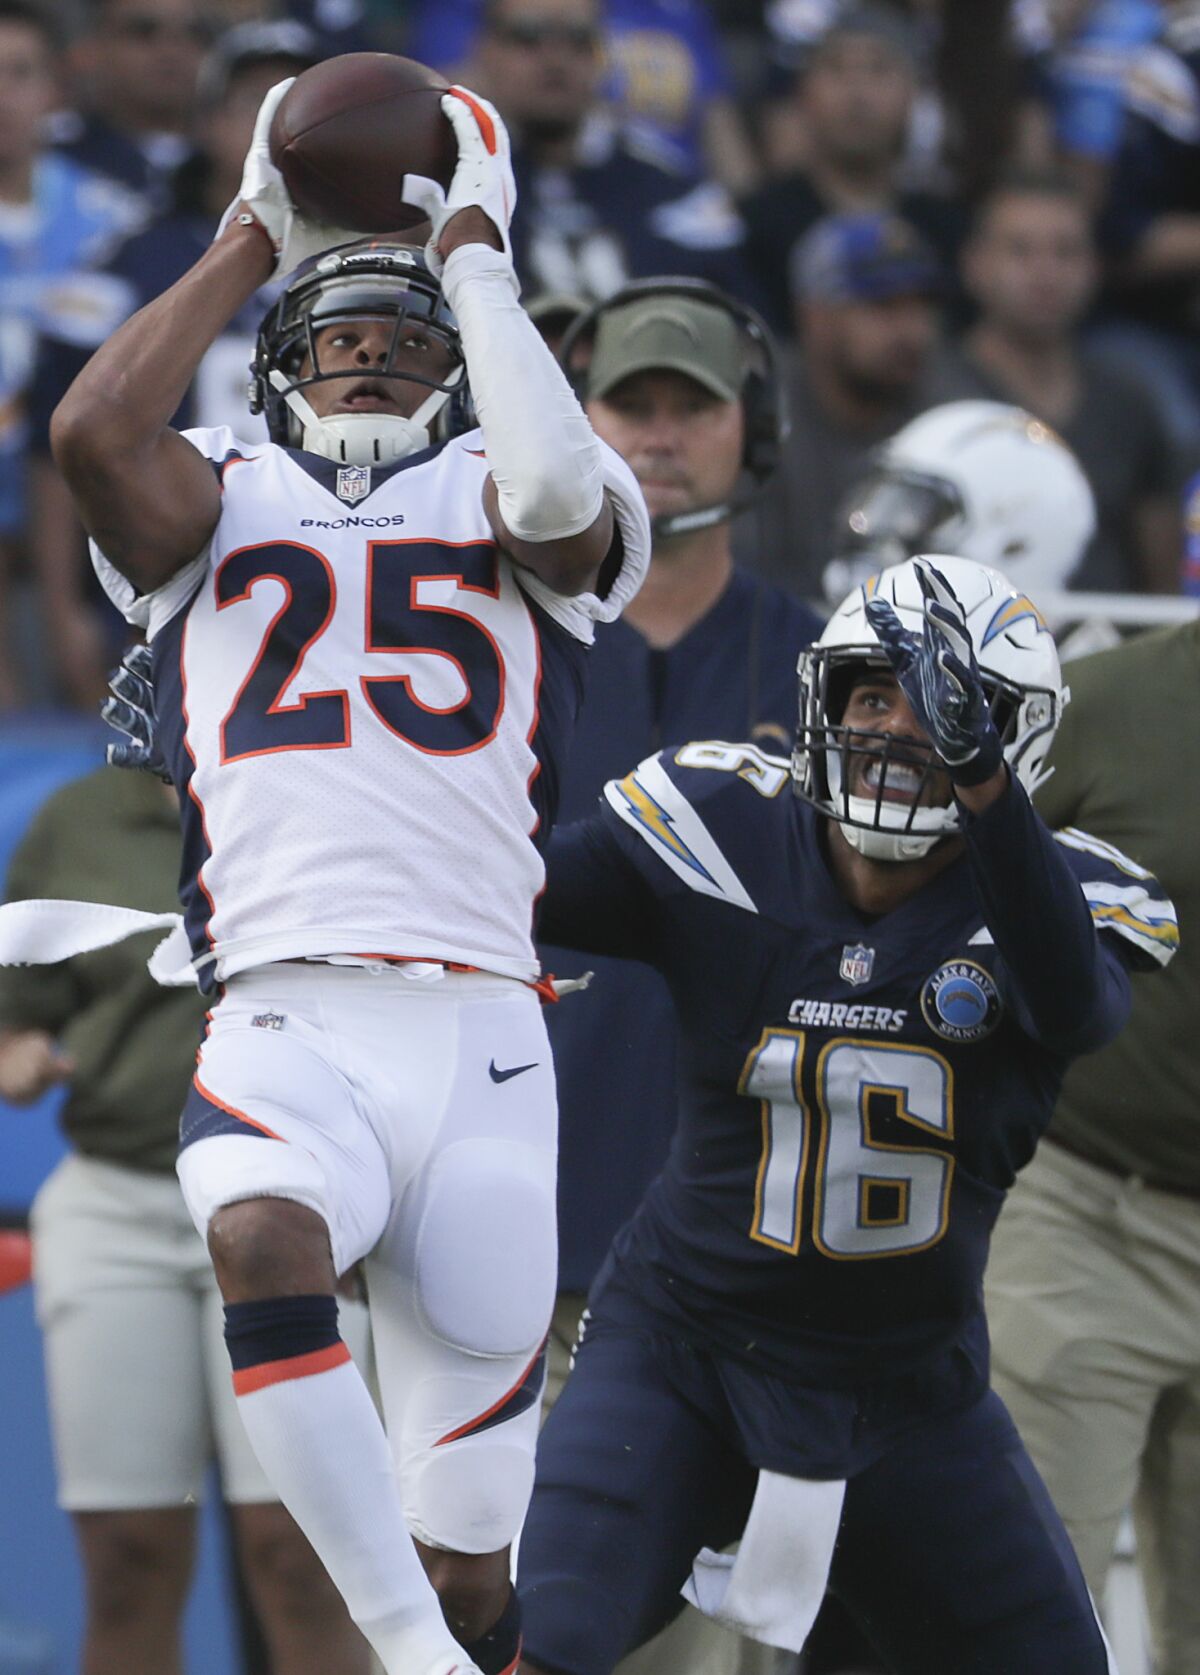 Denver Broncos cornerback Chris Harris Jr. intercepts a pass intended for Chargers receiver Tyrell Williams.